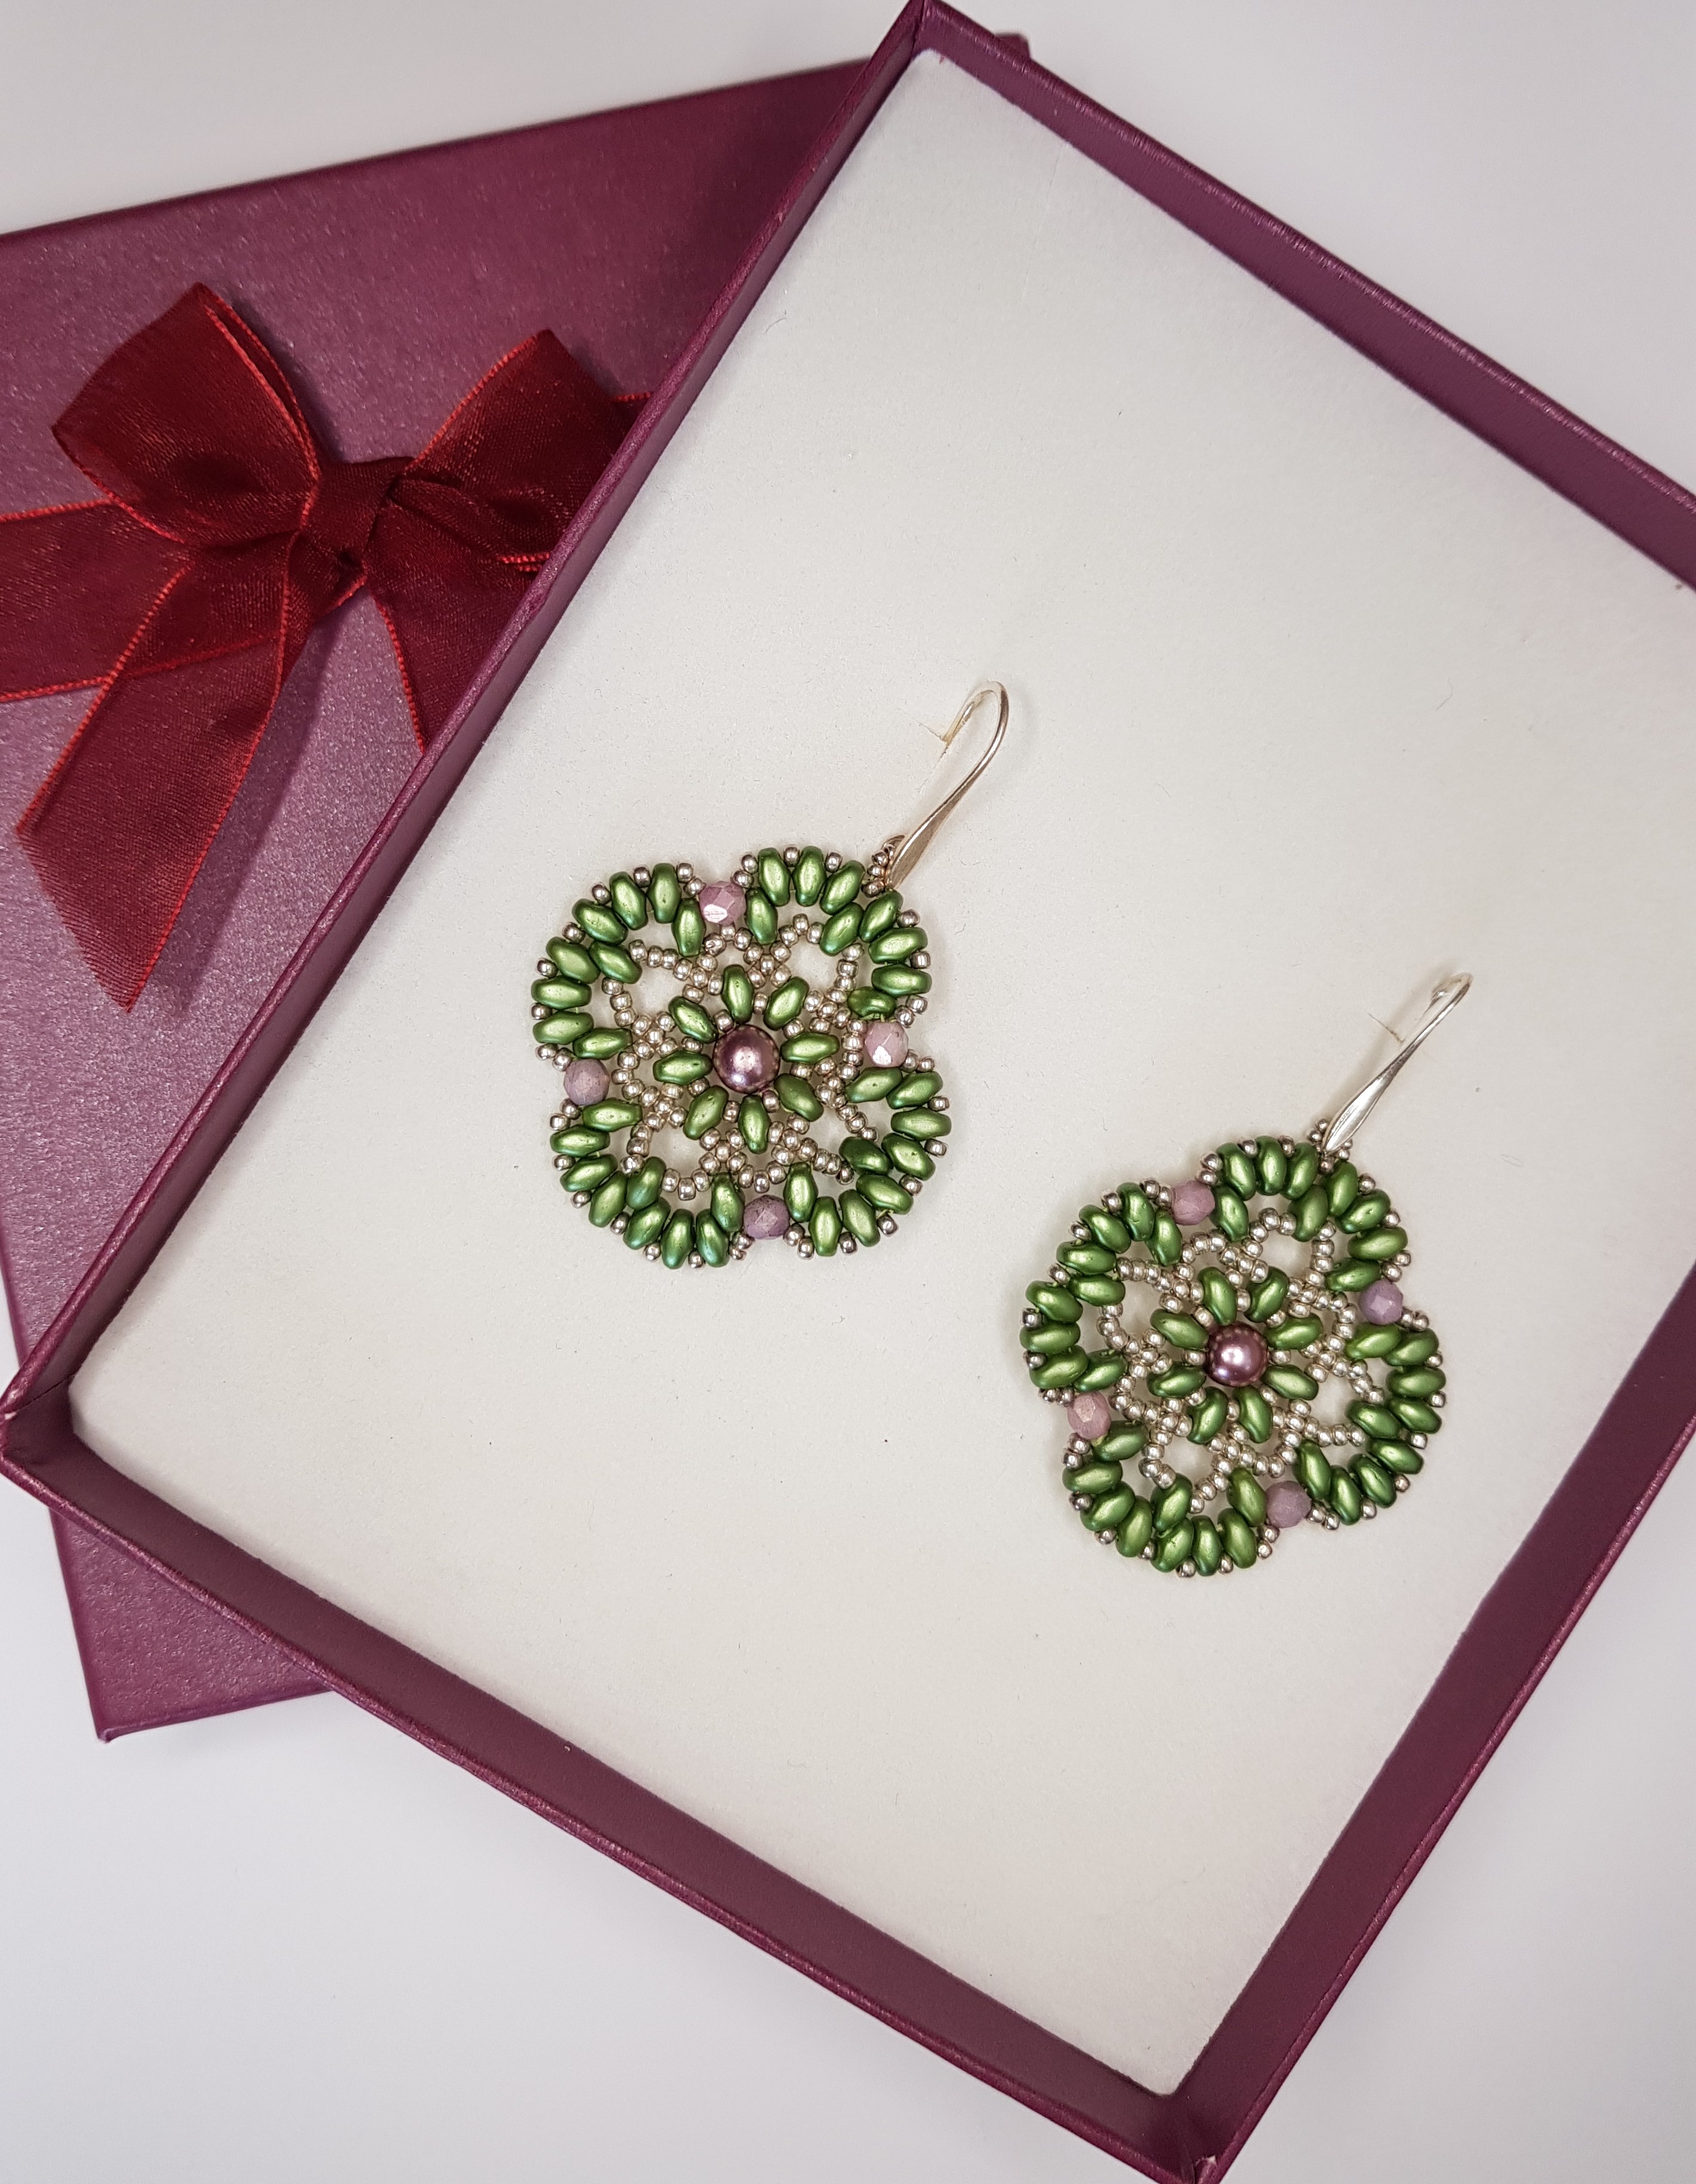 Angelica - Flower-shaped colored pendant earrings